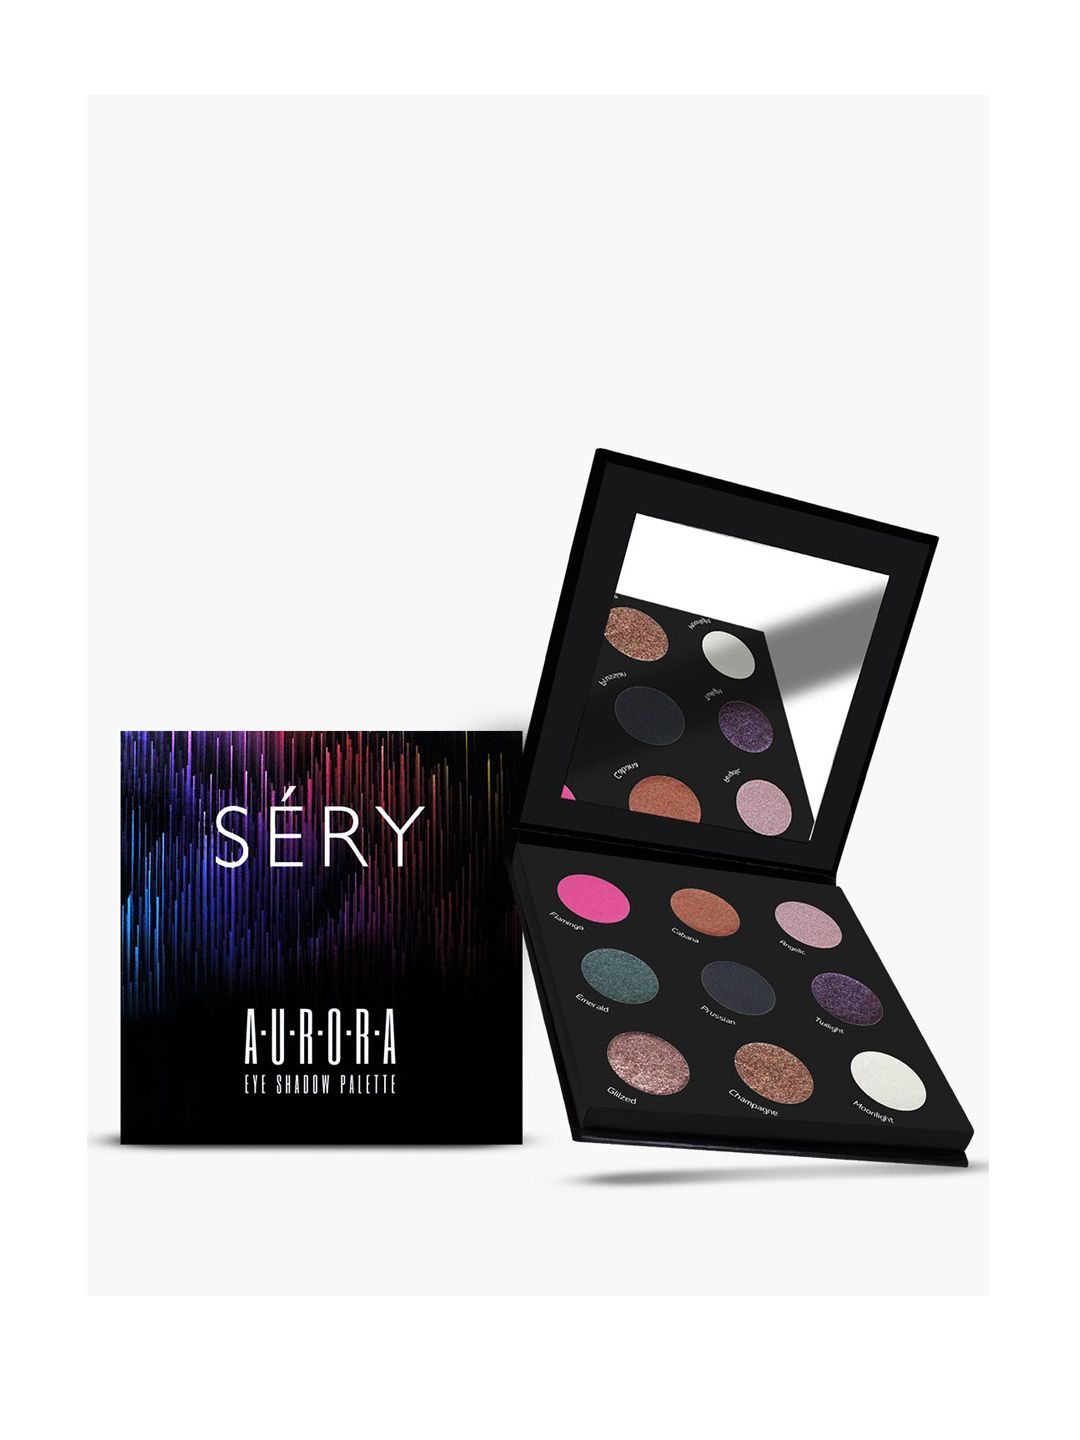 SERY 9 in 1 Matte Aurora Eye Shadow Palette - Cosmo Delight Price in India